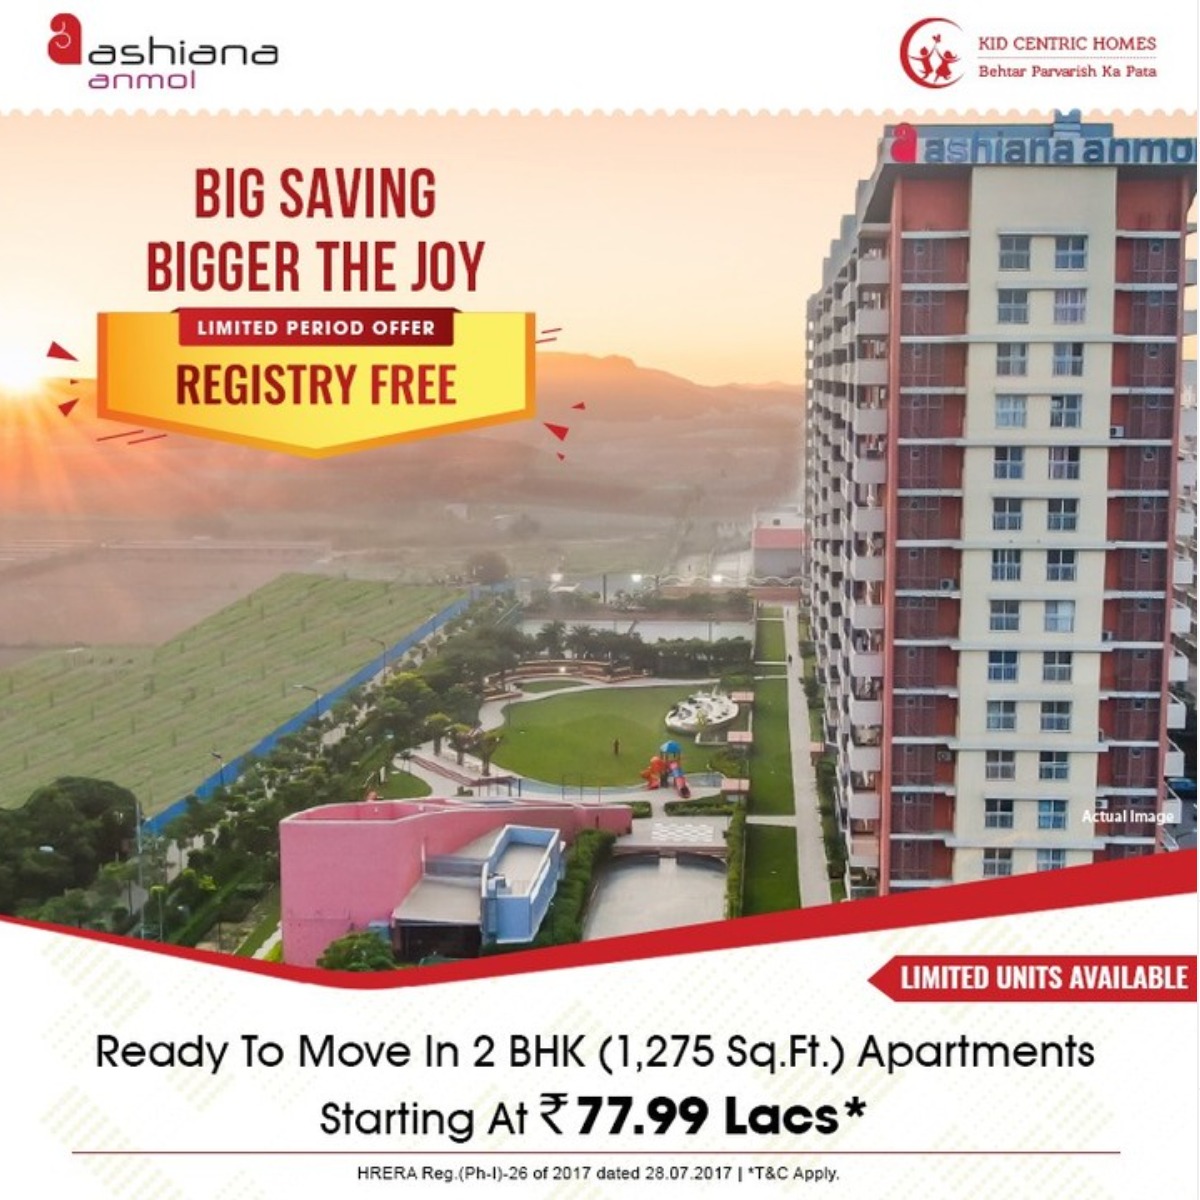 Offering 2 BHK Apartments Starting At Rs 77.99 Lacs At Ashiana Anmol in Sector 33 Sohna Road Gurugram